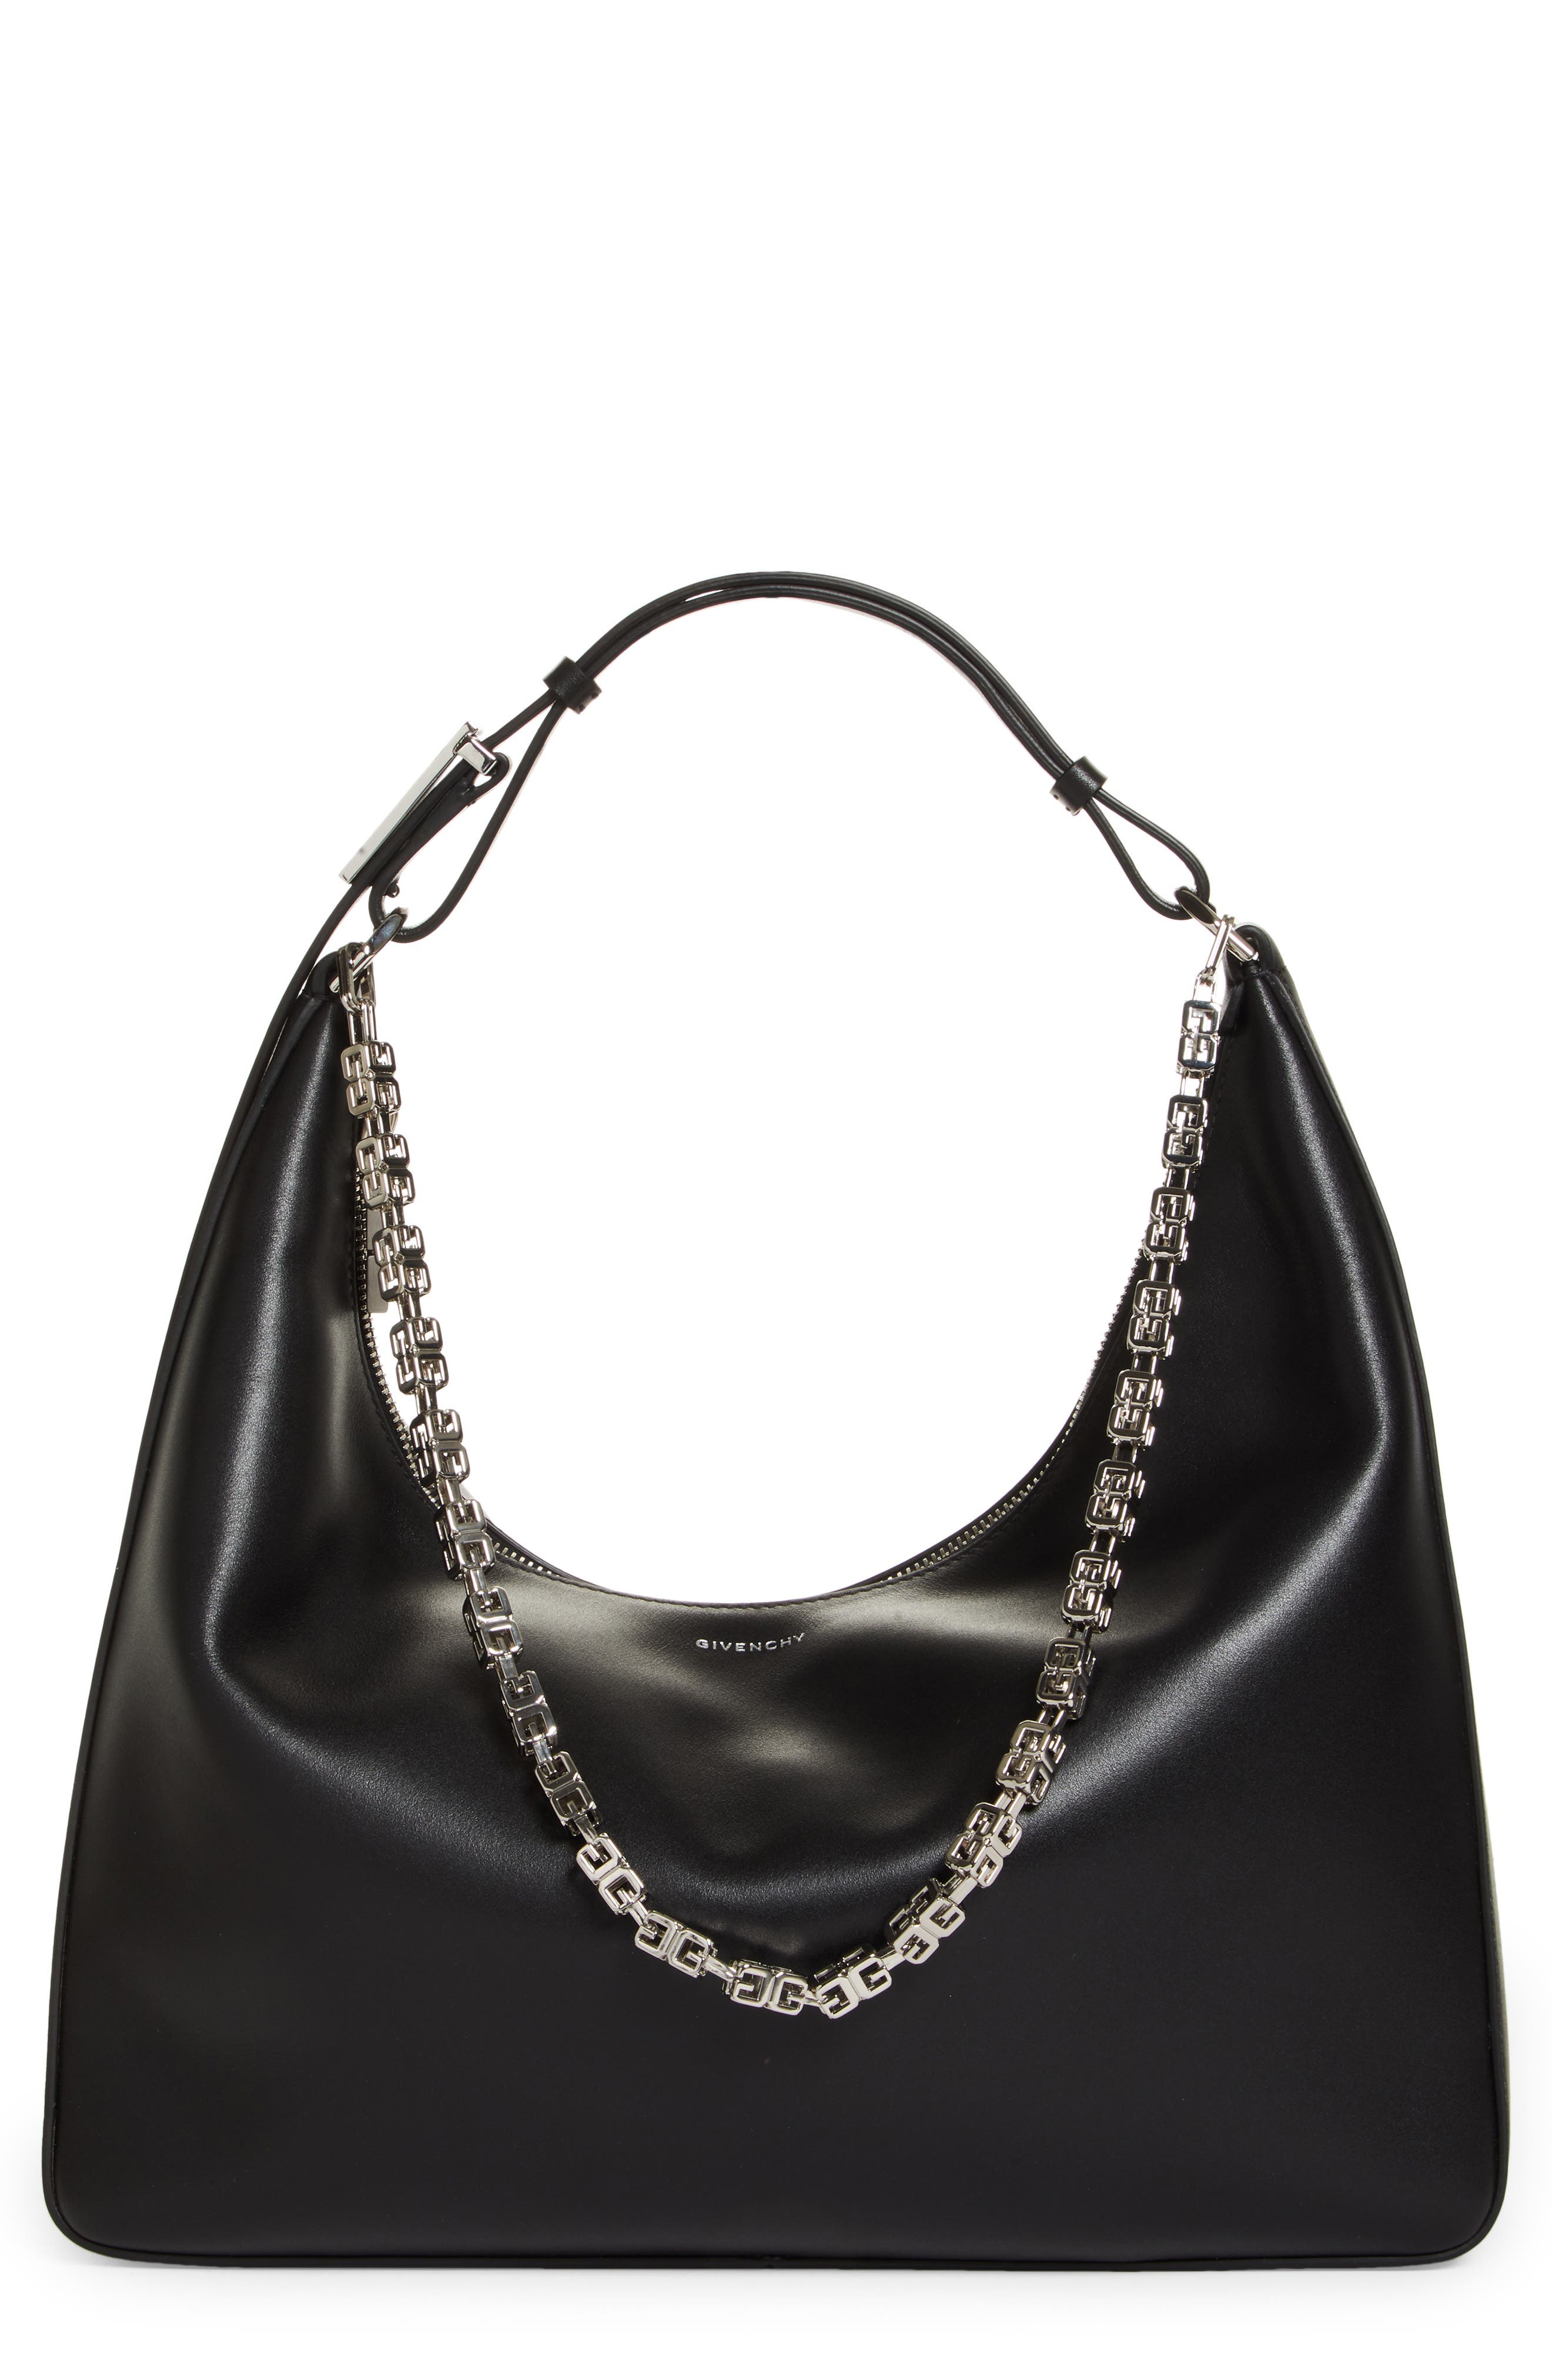 Givenchy Medium Moon Cutout Leather Hobo Bag in Dune at Nordstrom